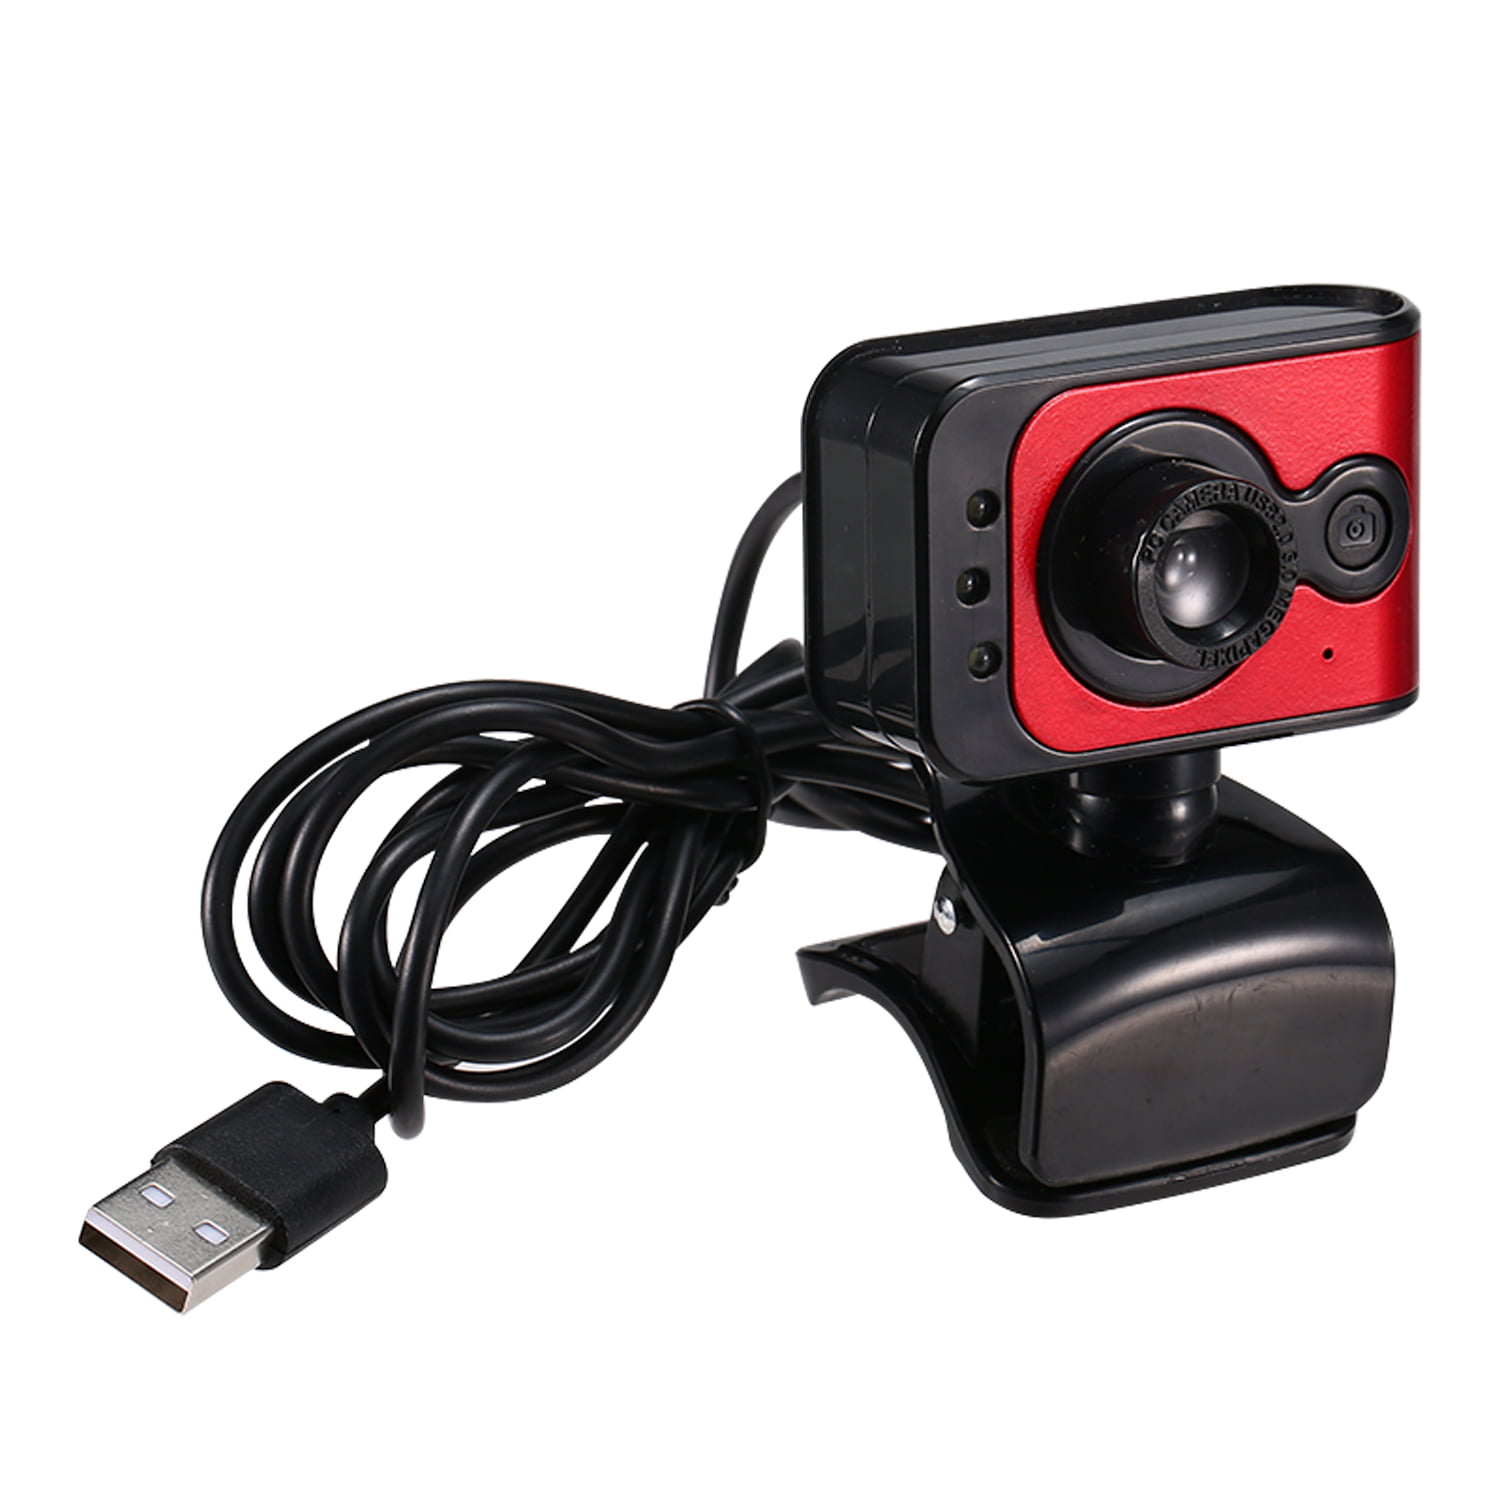 480P Webcam Live Streaming Webcam 360 Degree Rotatable USB Camera for PC  Laptop Clip-On Webcam for Video Conference Meeting Gaming Desktop Office |  Walmart Canada